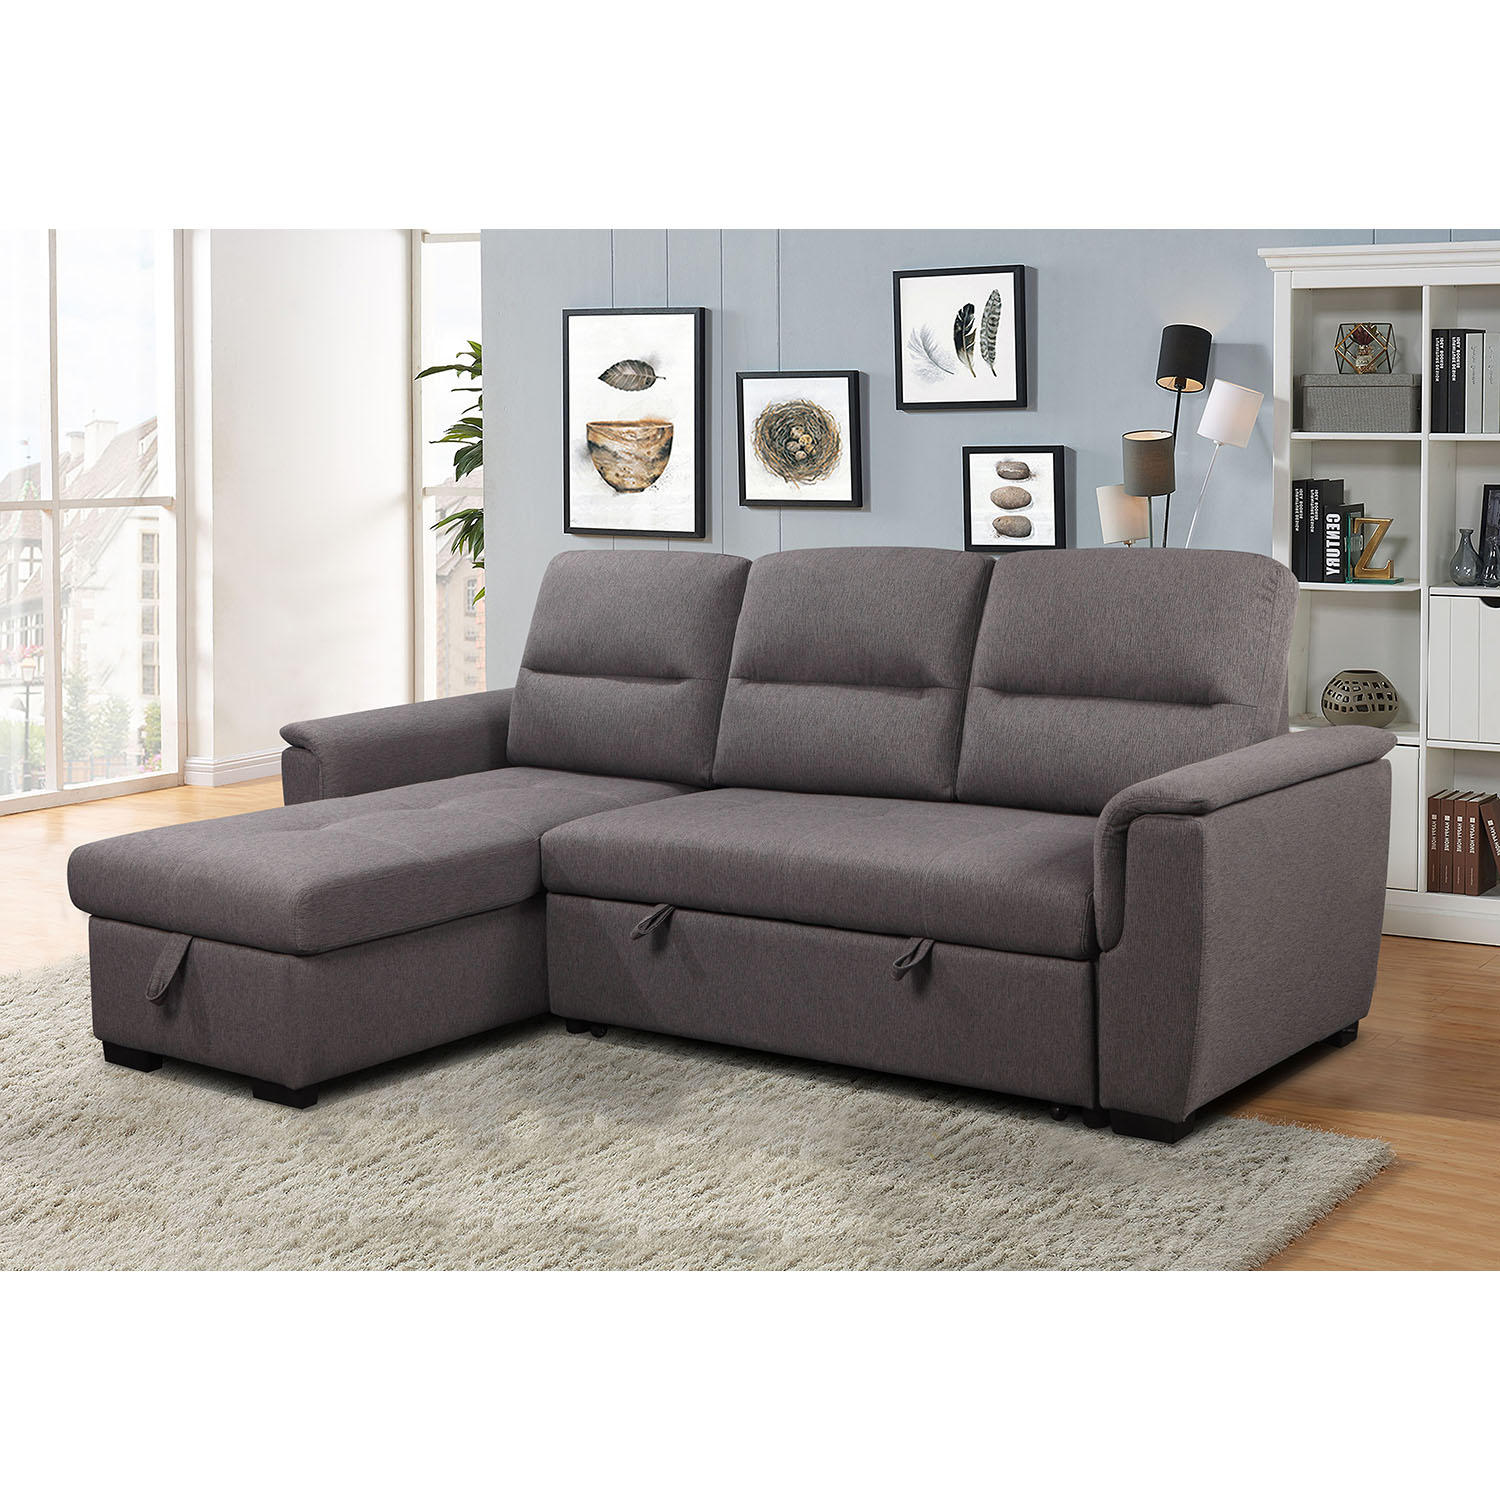 Dakota Reversible Storage Sectional Sofa with Pullout Bed